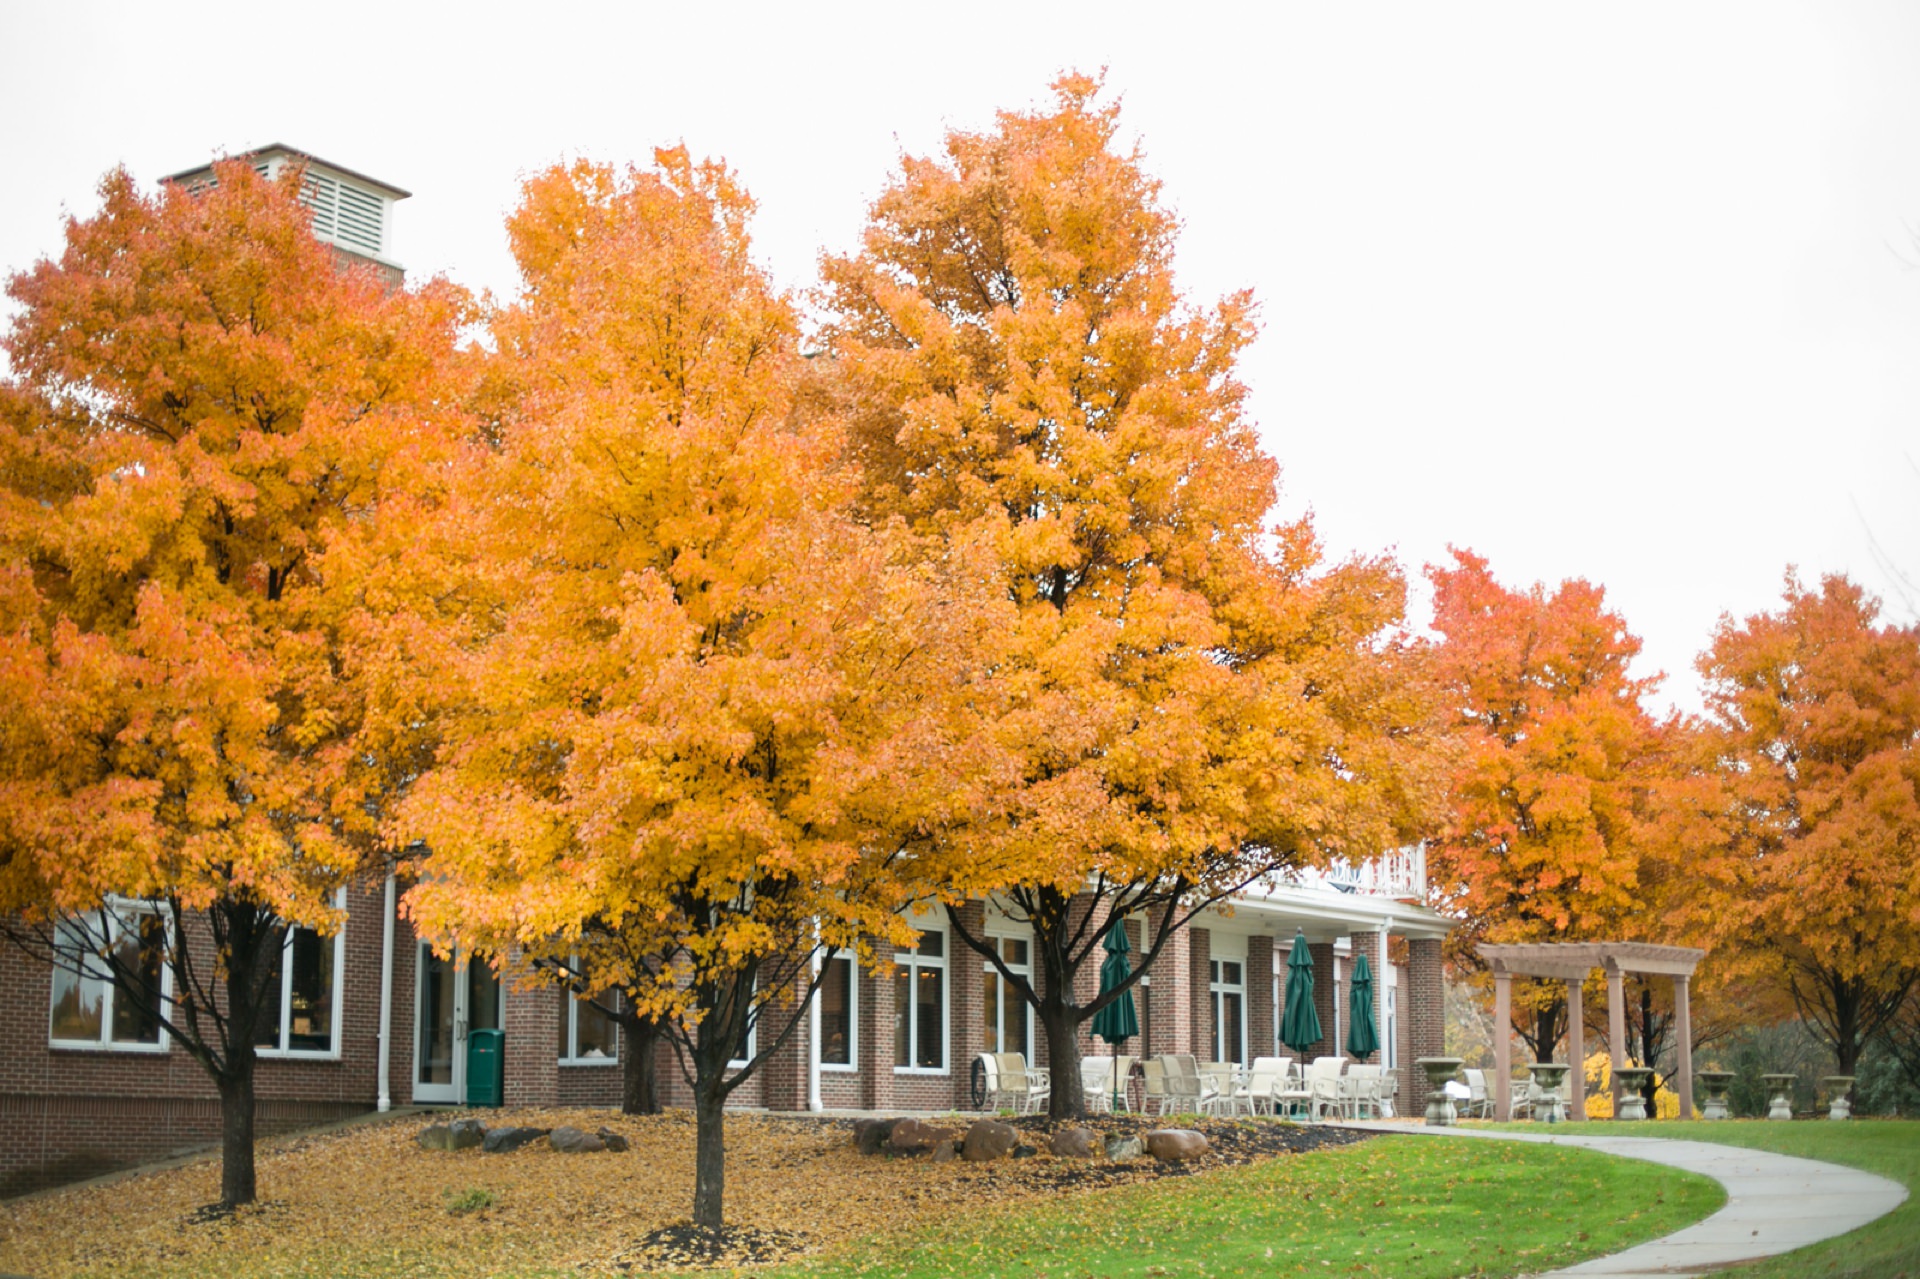 trees with orange leaves surround the broadmoor country club for this Indianapolis Event Venue Photography